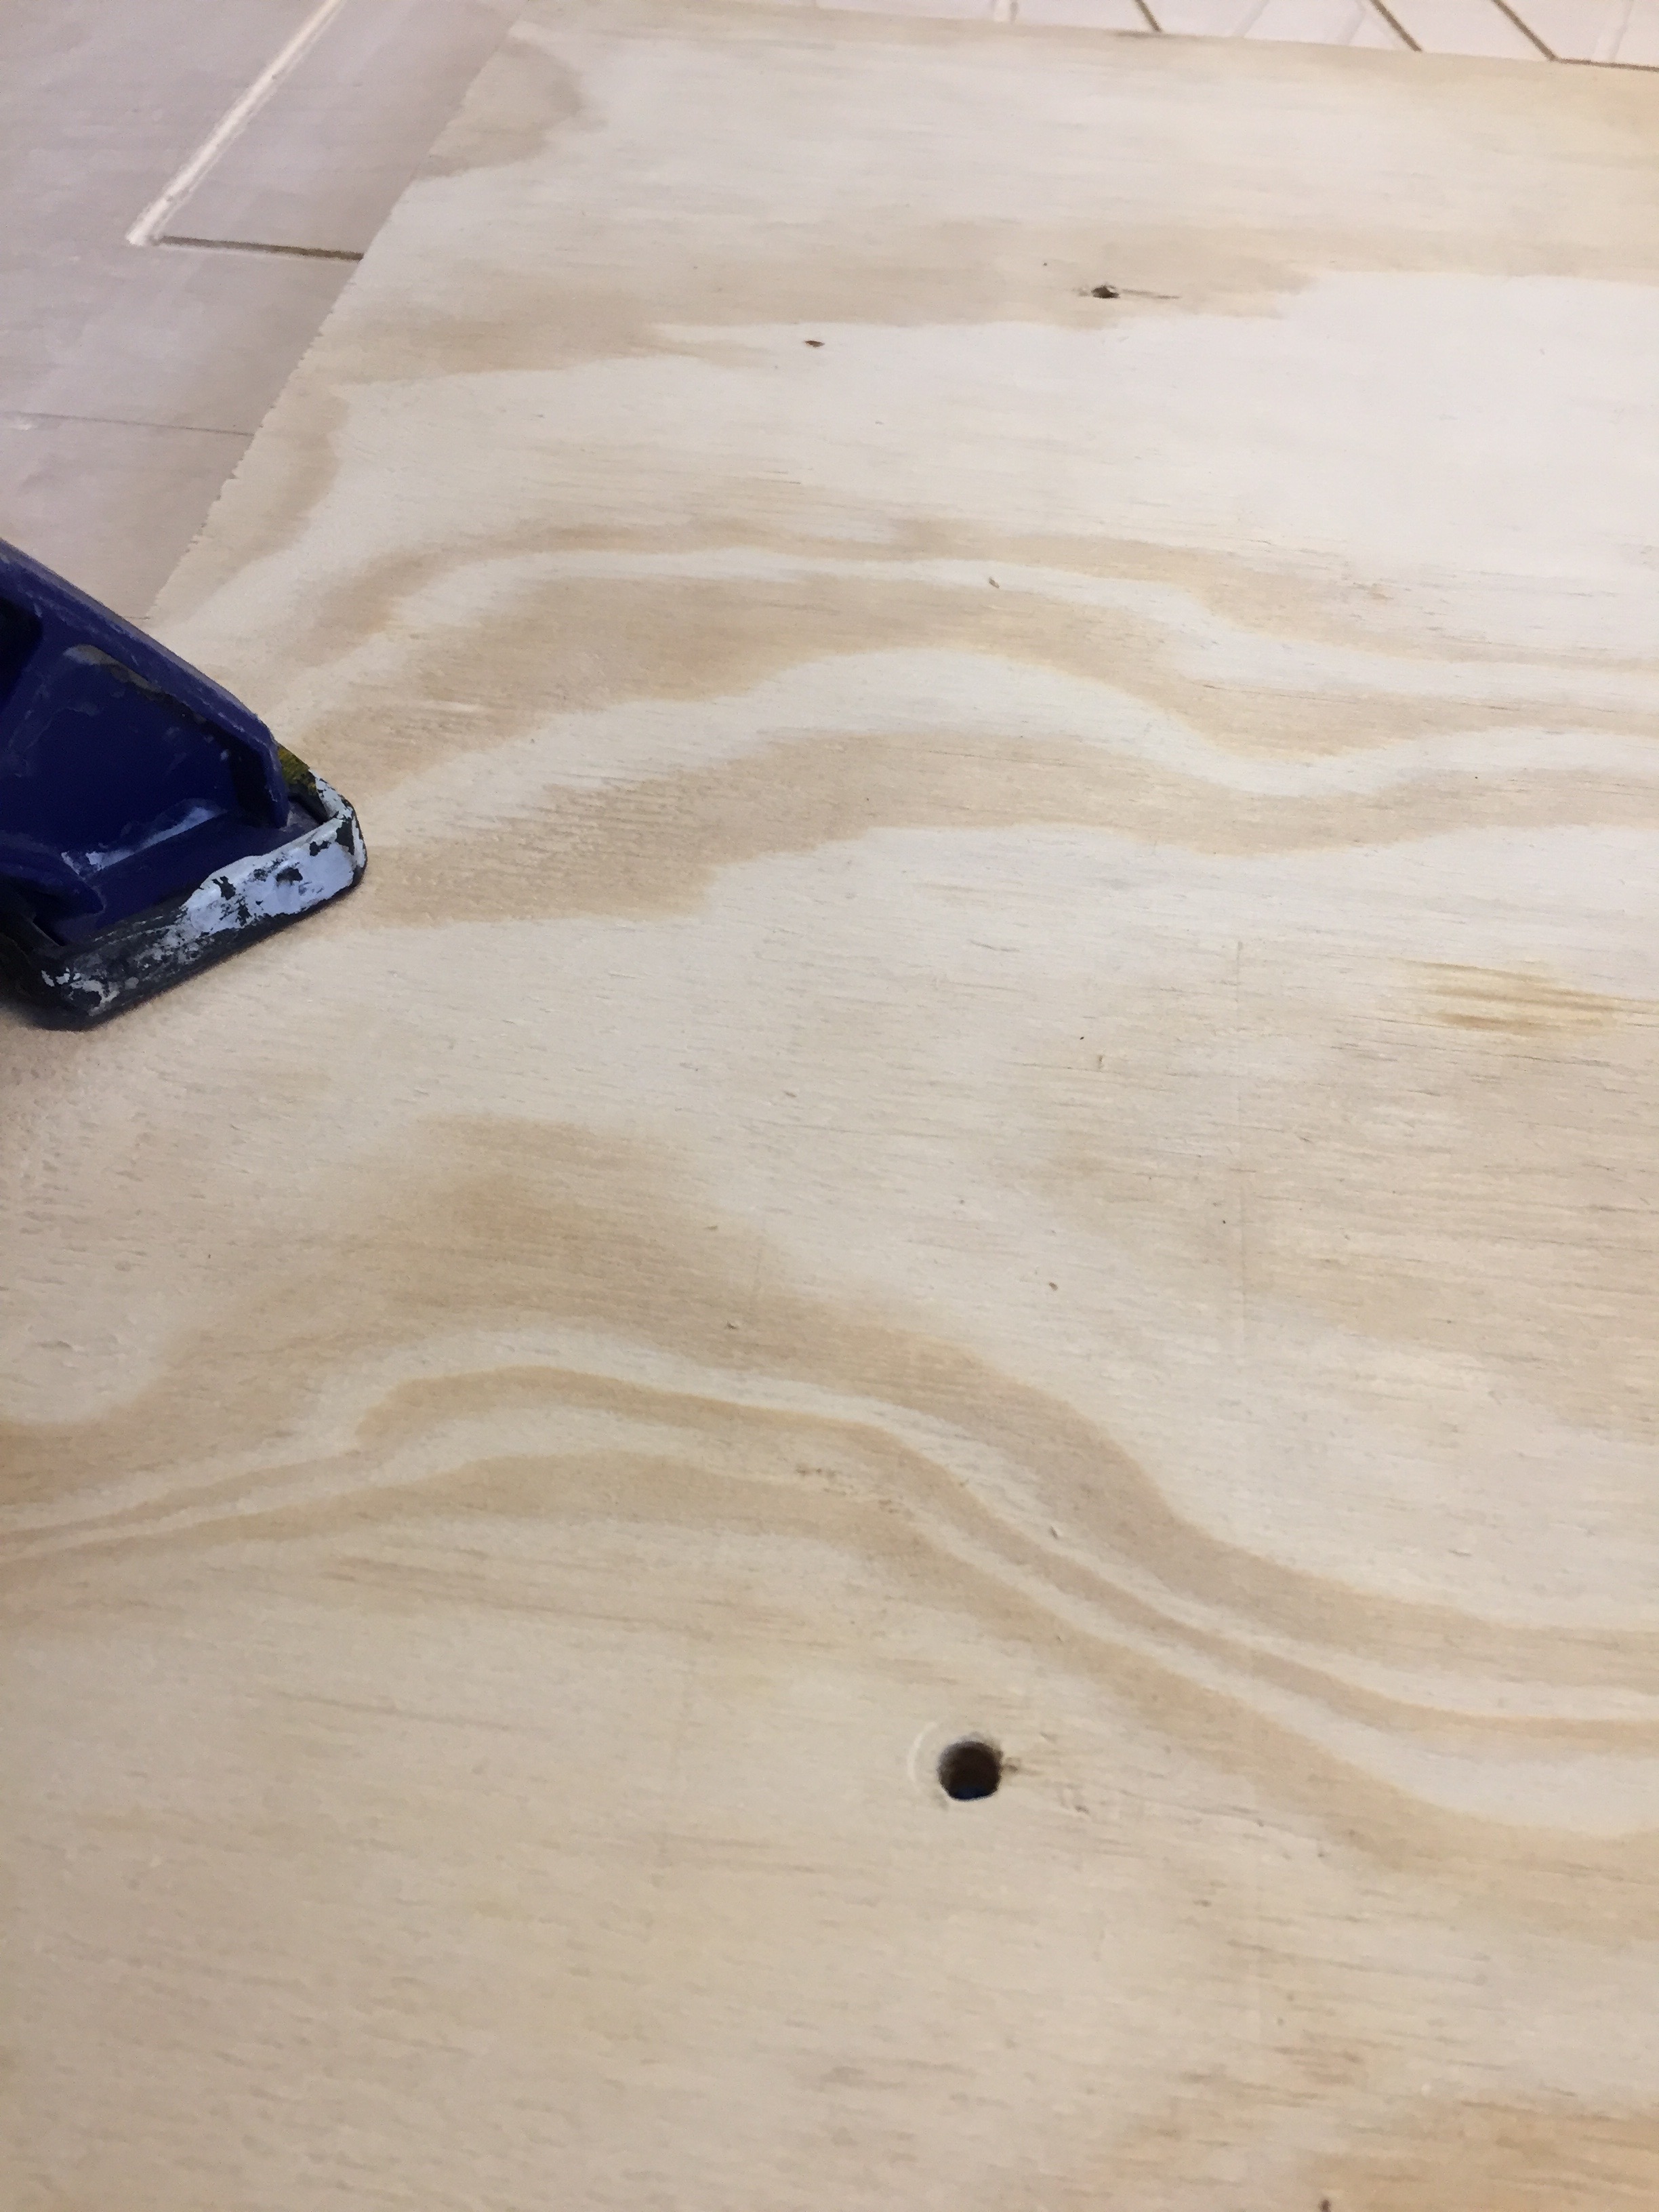 Drilled center holes